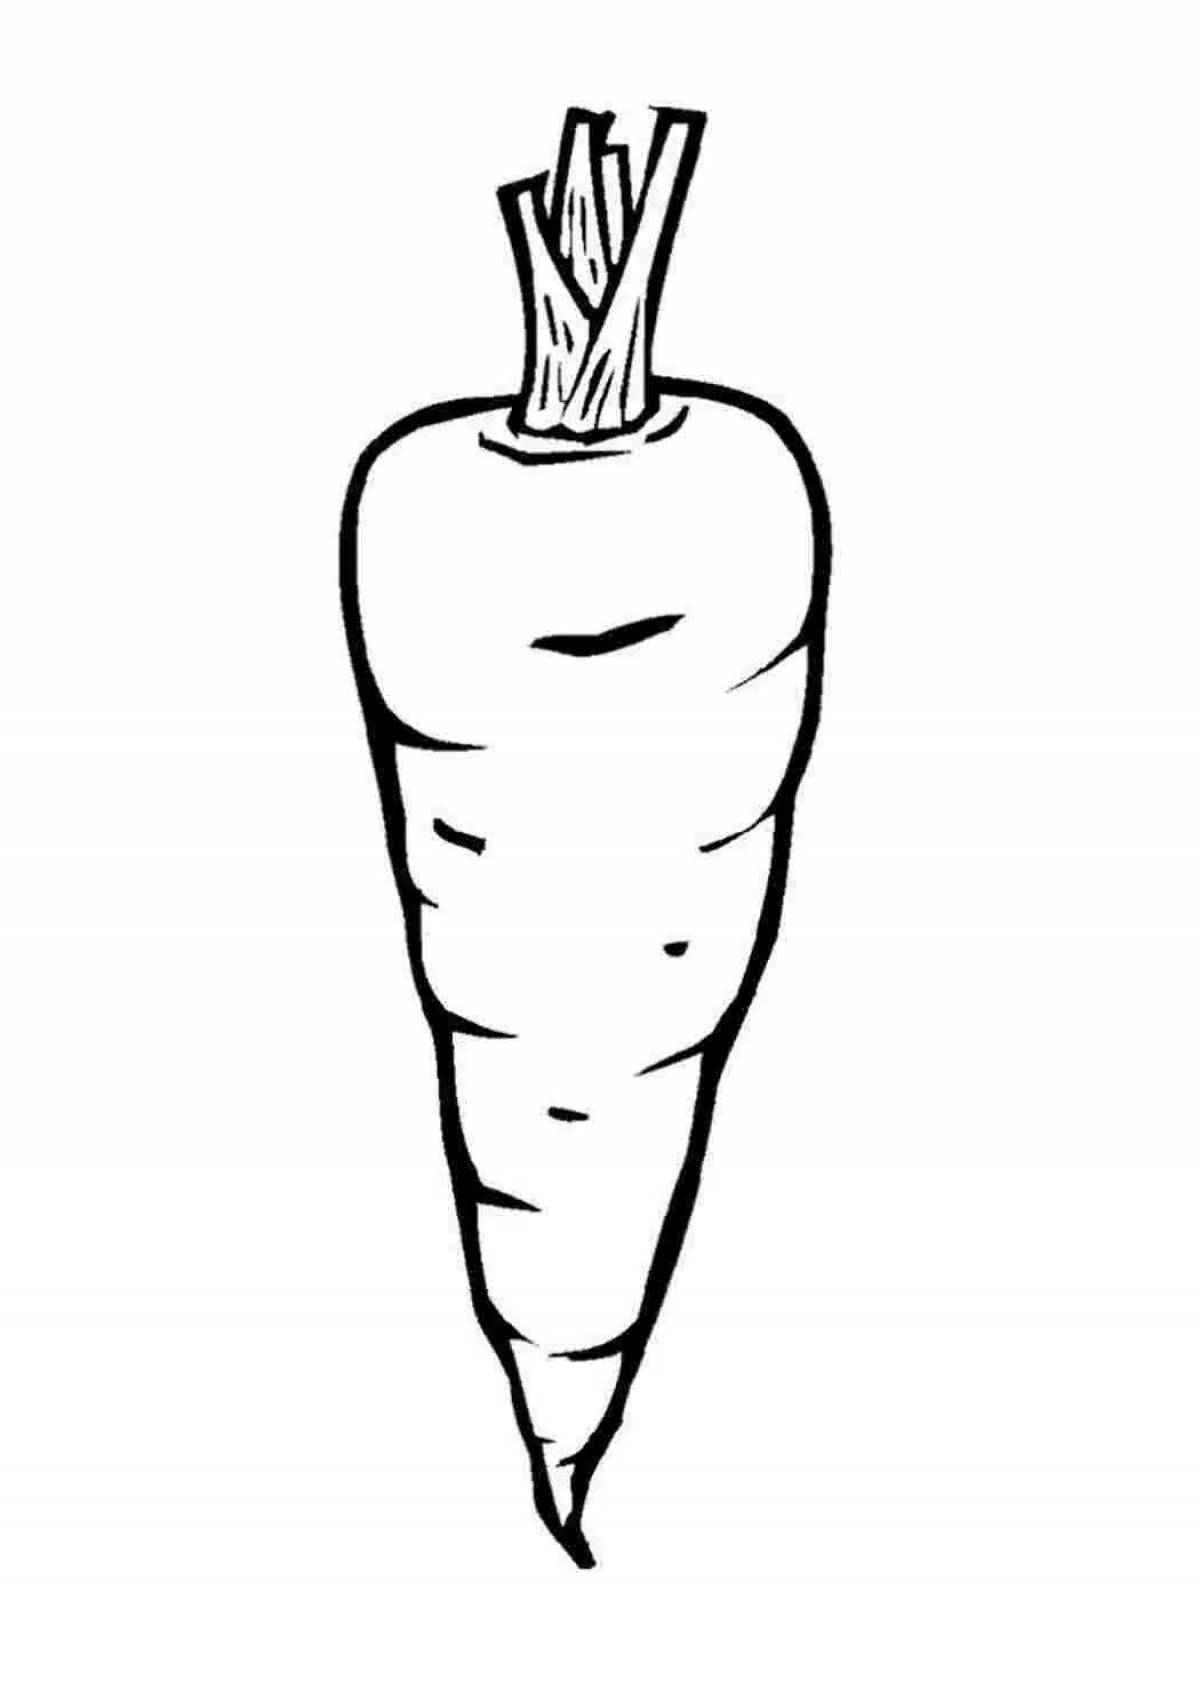 Carrot pattern coloring page